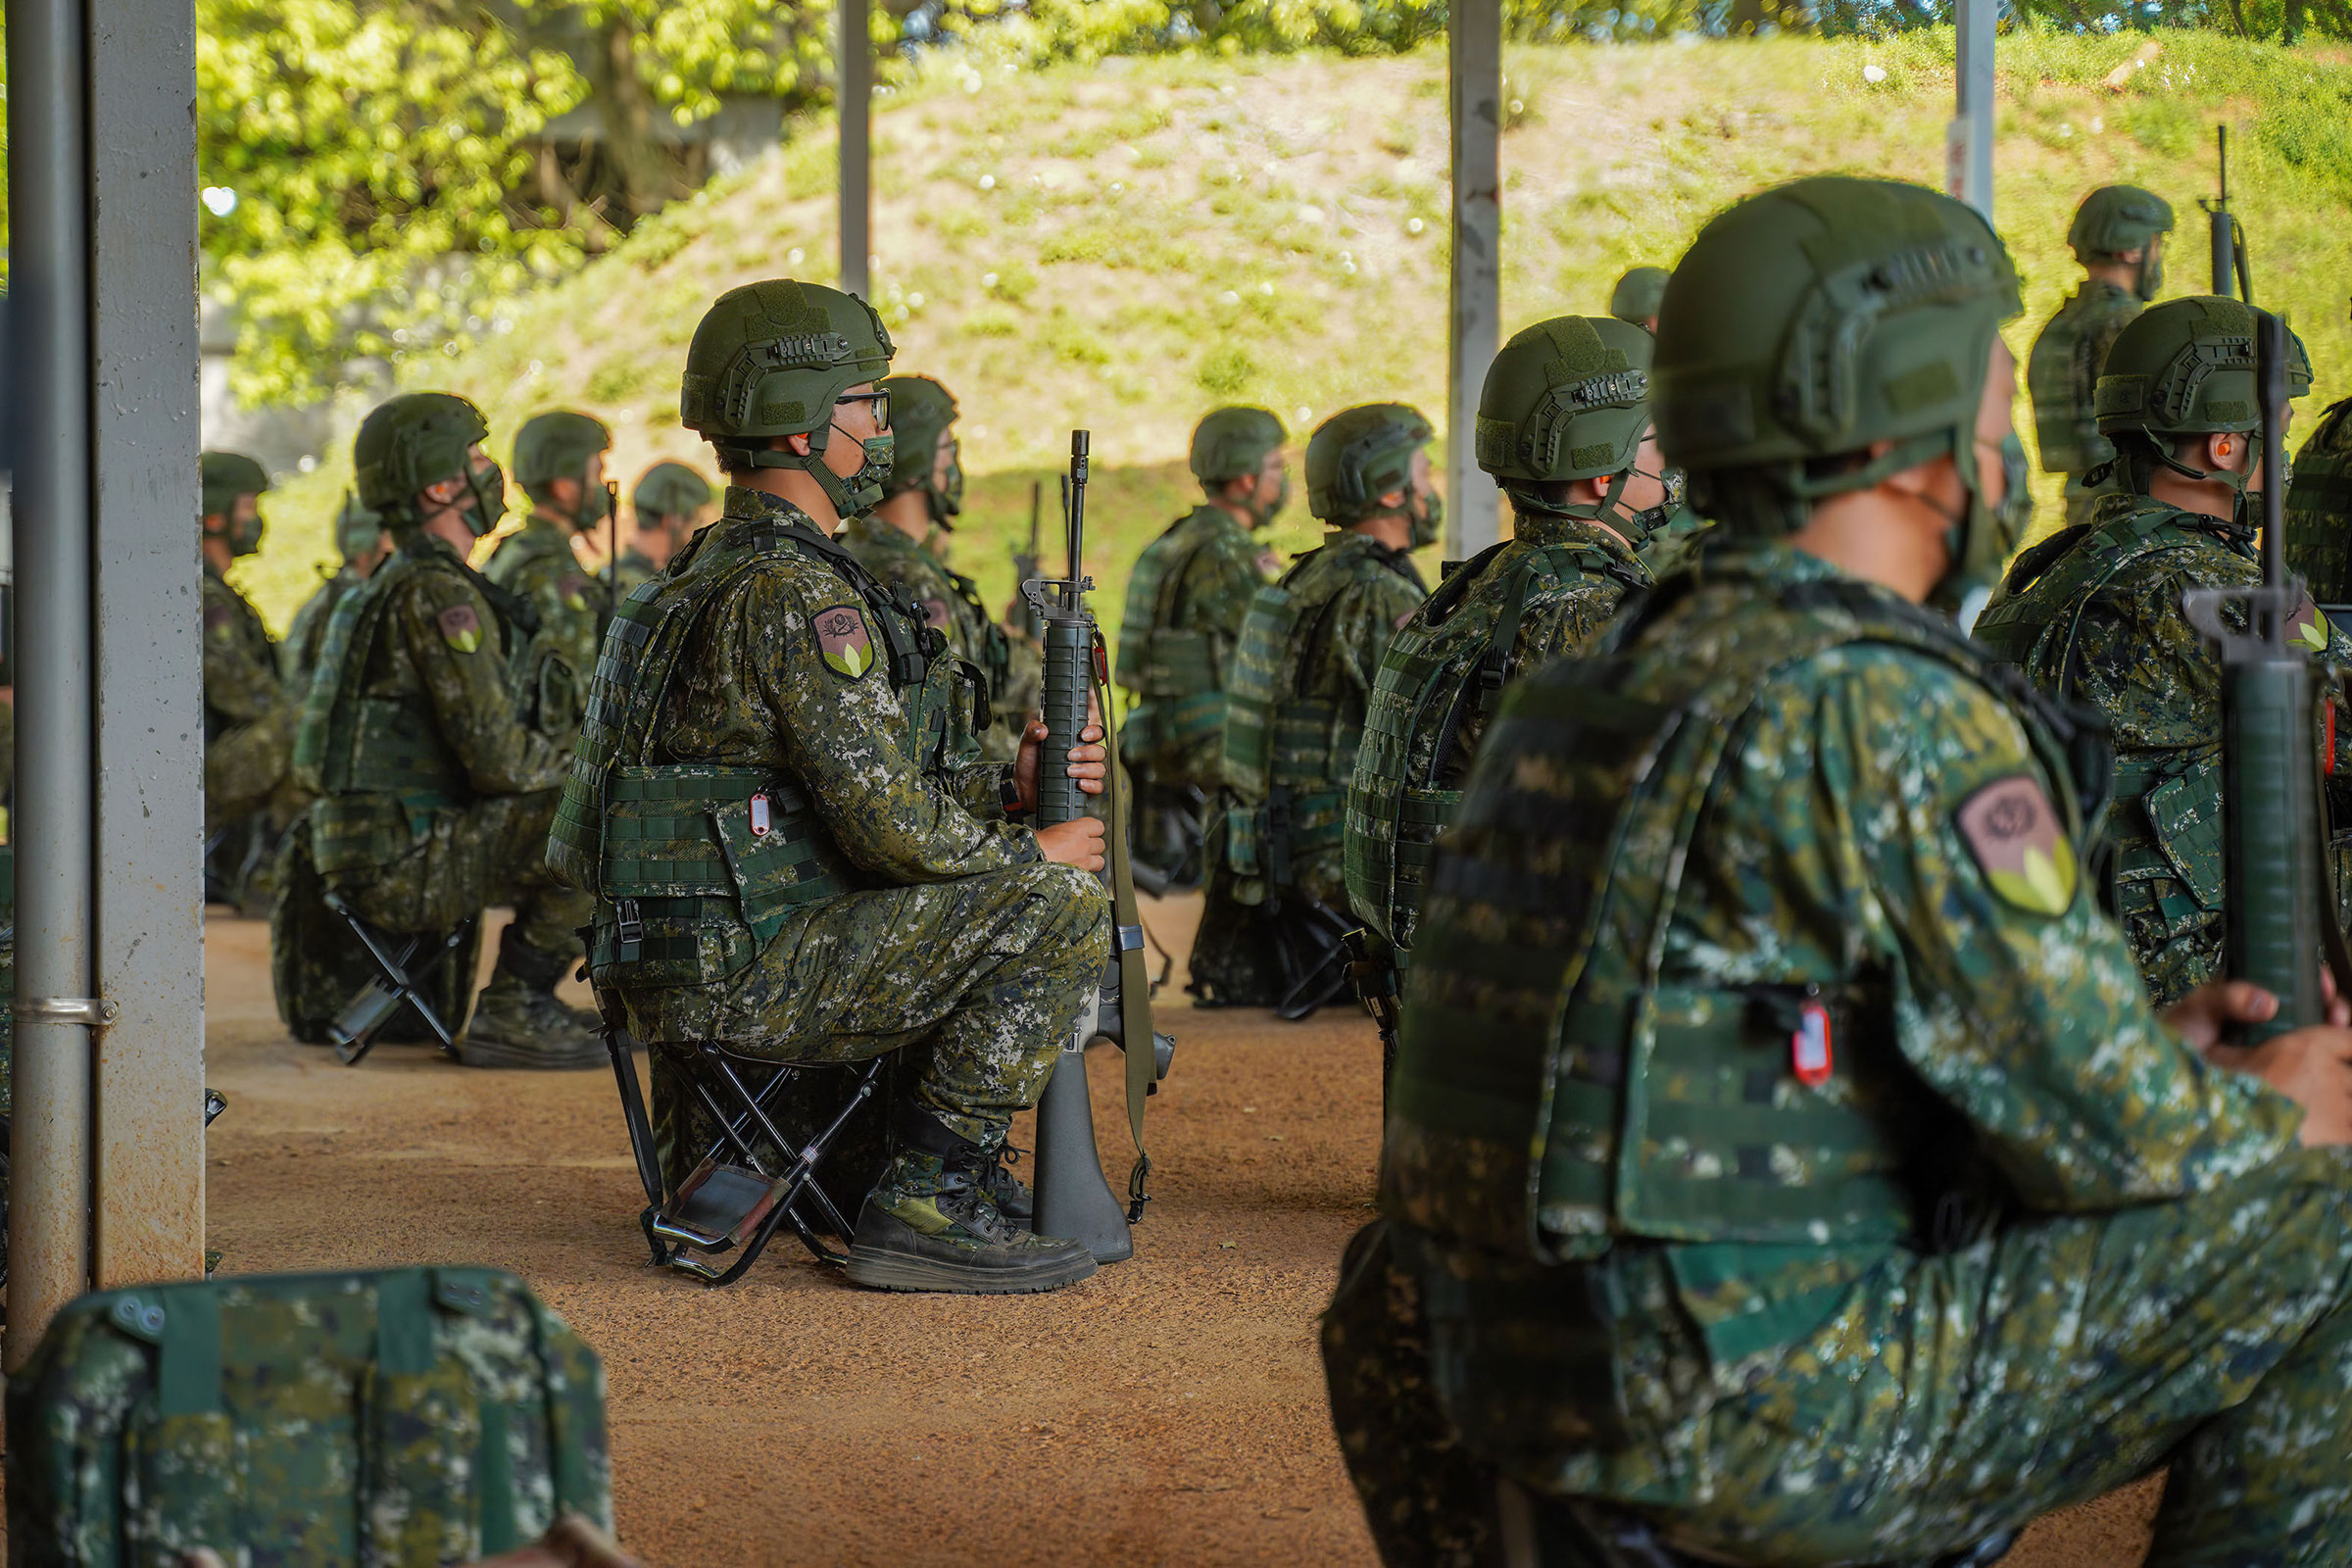 Army reservists hold rifles during training at a camp base in Taiwan on March 14, 2022. (Walid Berrazeg—SOPA Images/LightRocket/Getty Images)